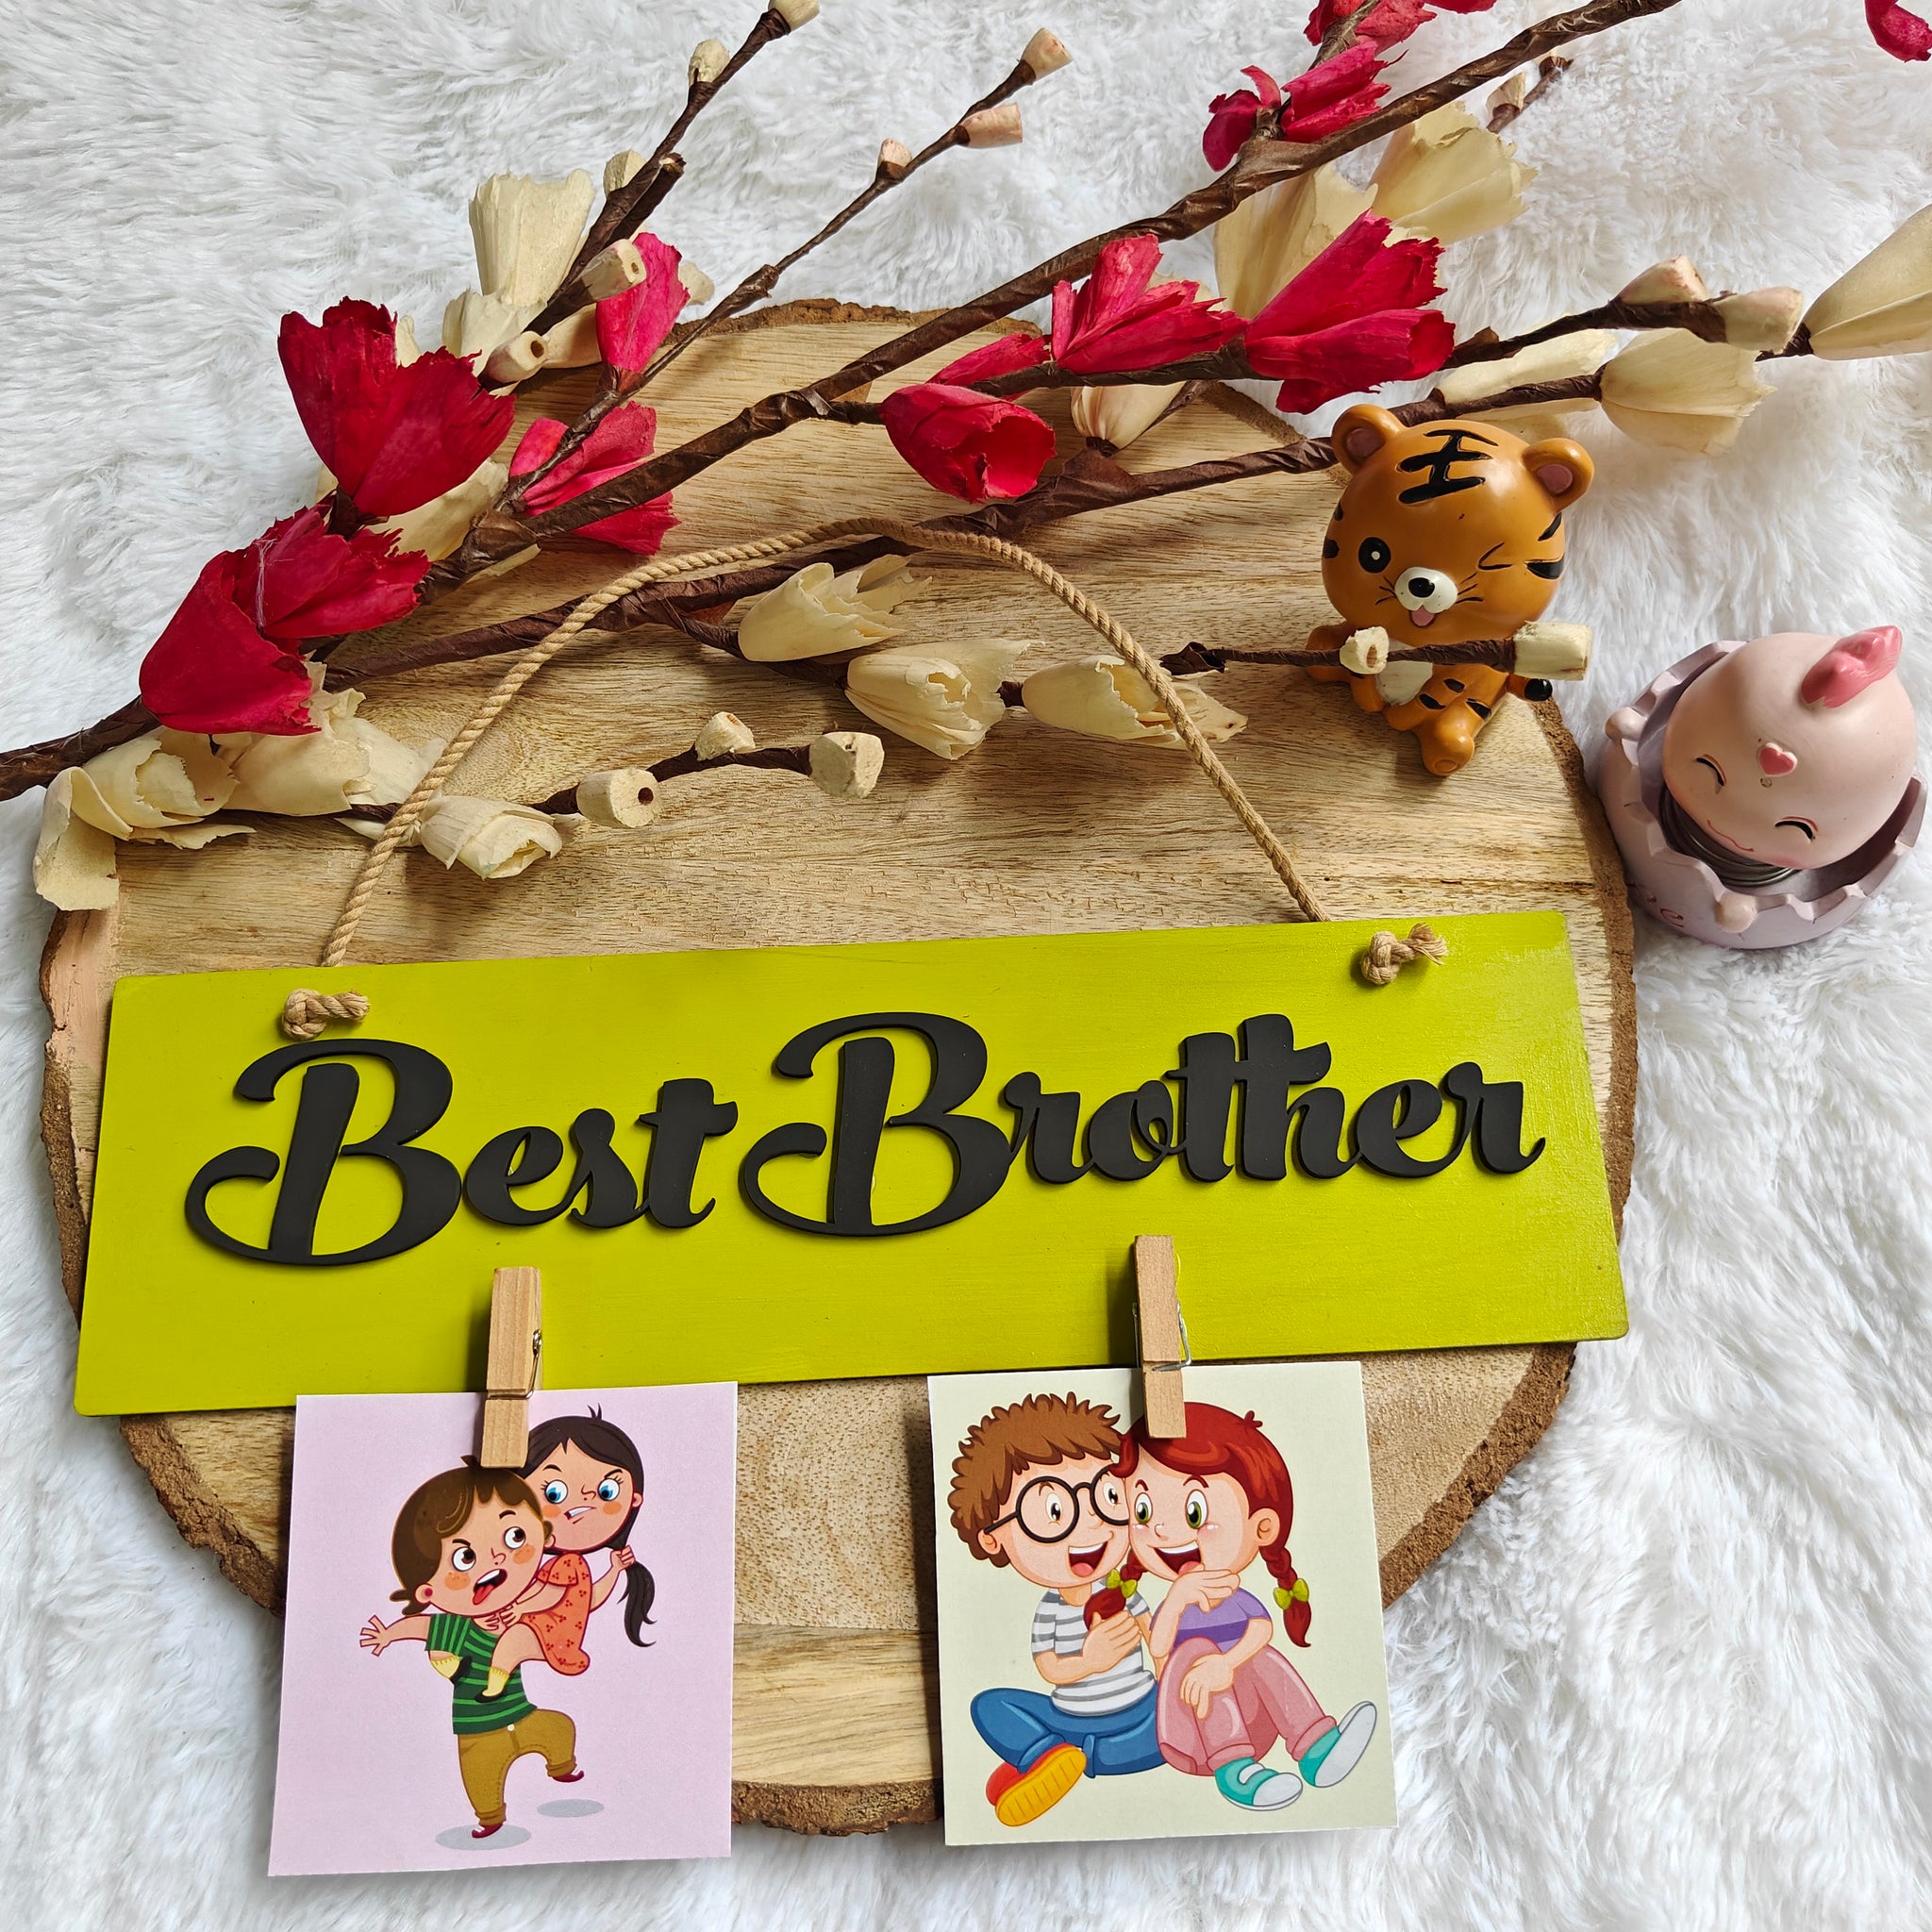 Best Brother wall hanging